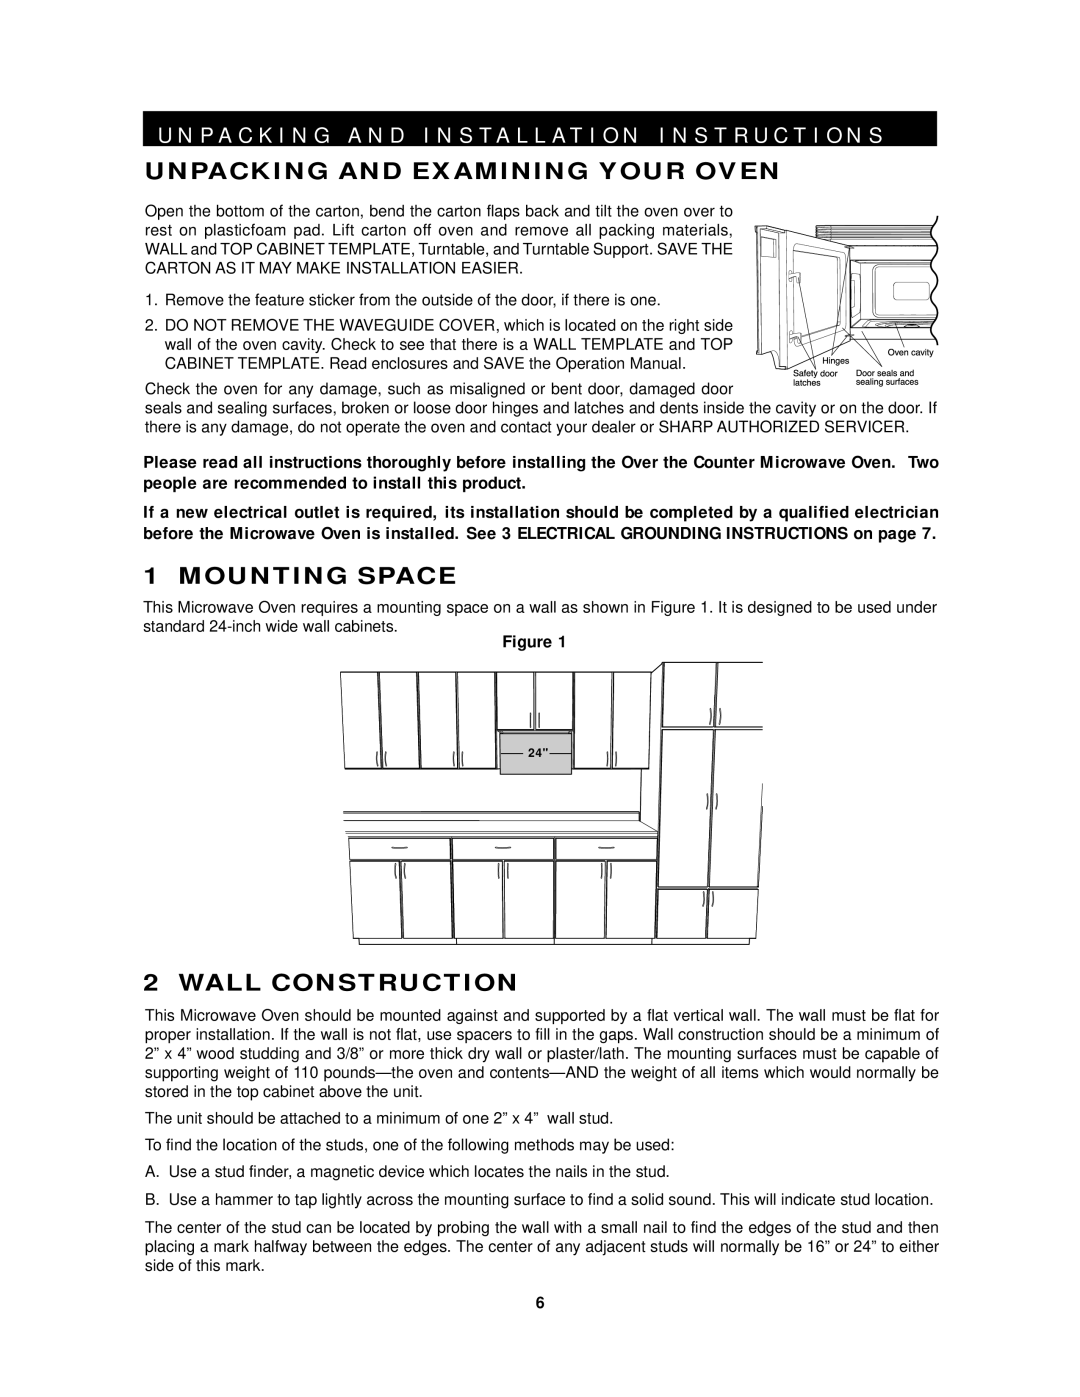 Sharp R-1200, R-1201 operation manual Unpacking and Examining Your Oven, Mounting Space, Wall Construction 